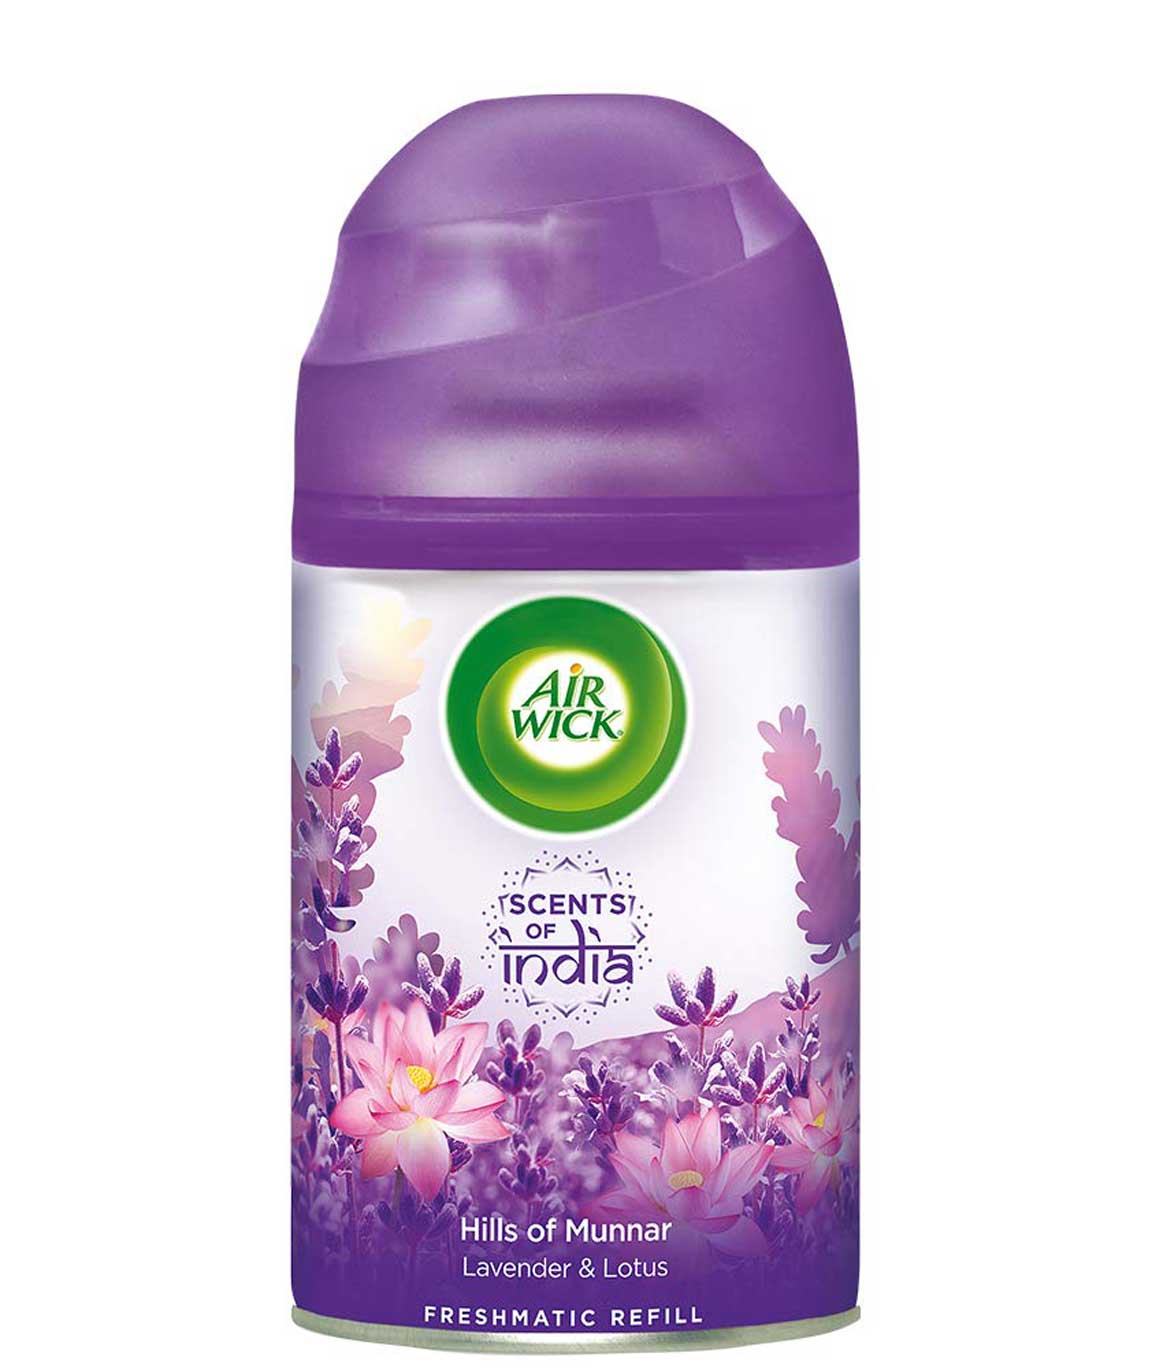 Airwick Freshmatic `Scents of India` Air-freshner Refill, Hills of Munnar - 250 ml